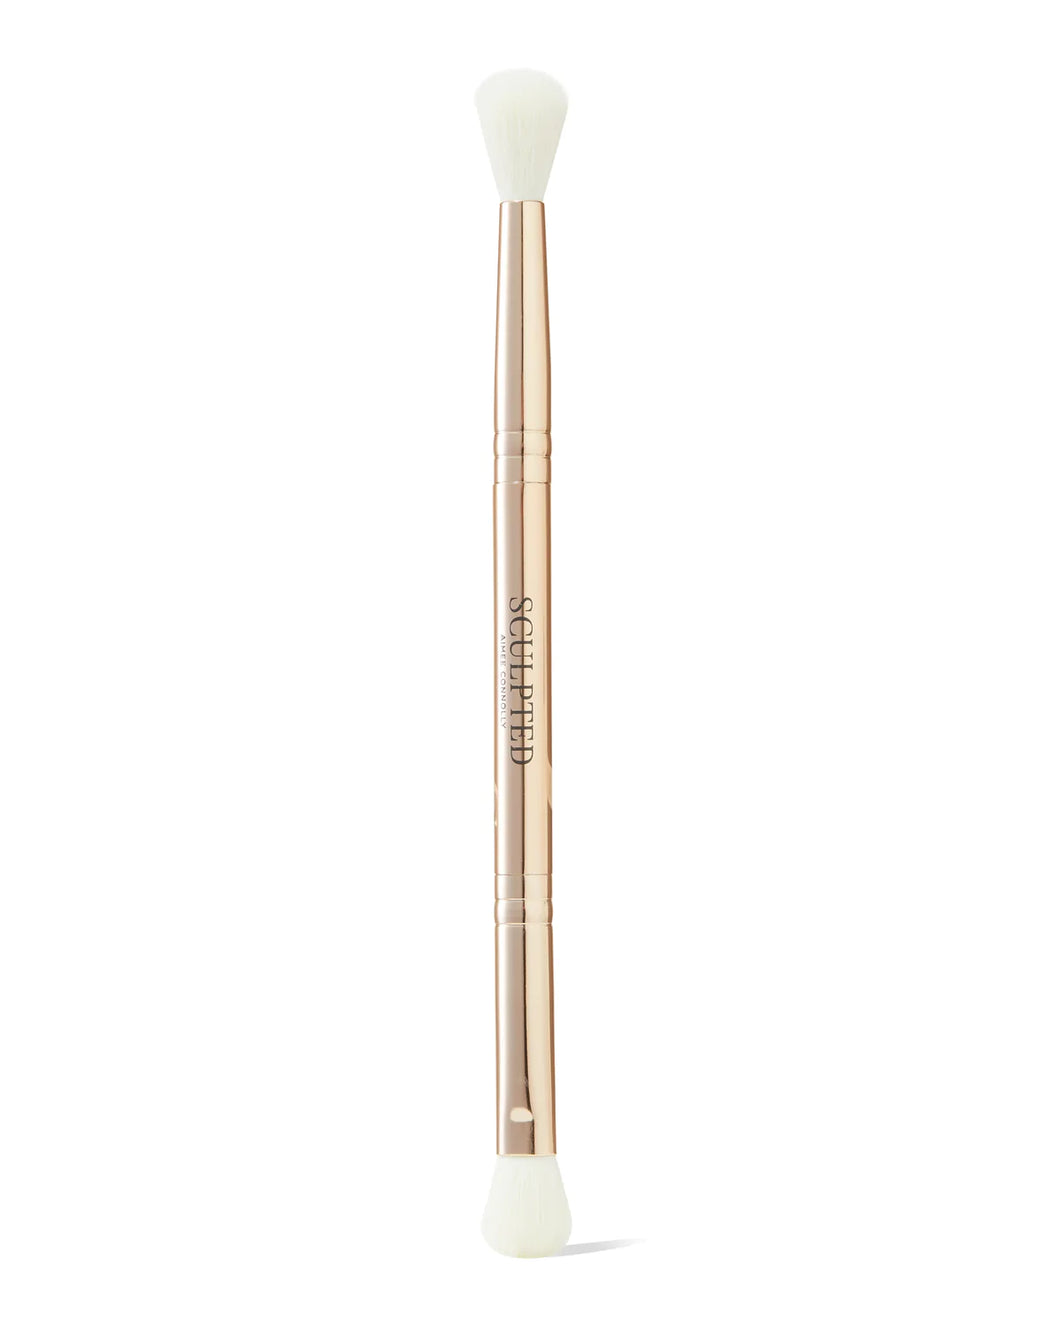 Sculpted by Aimee Blender Duo Brush